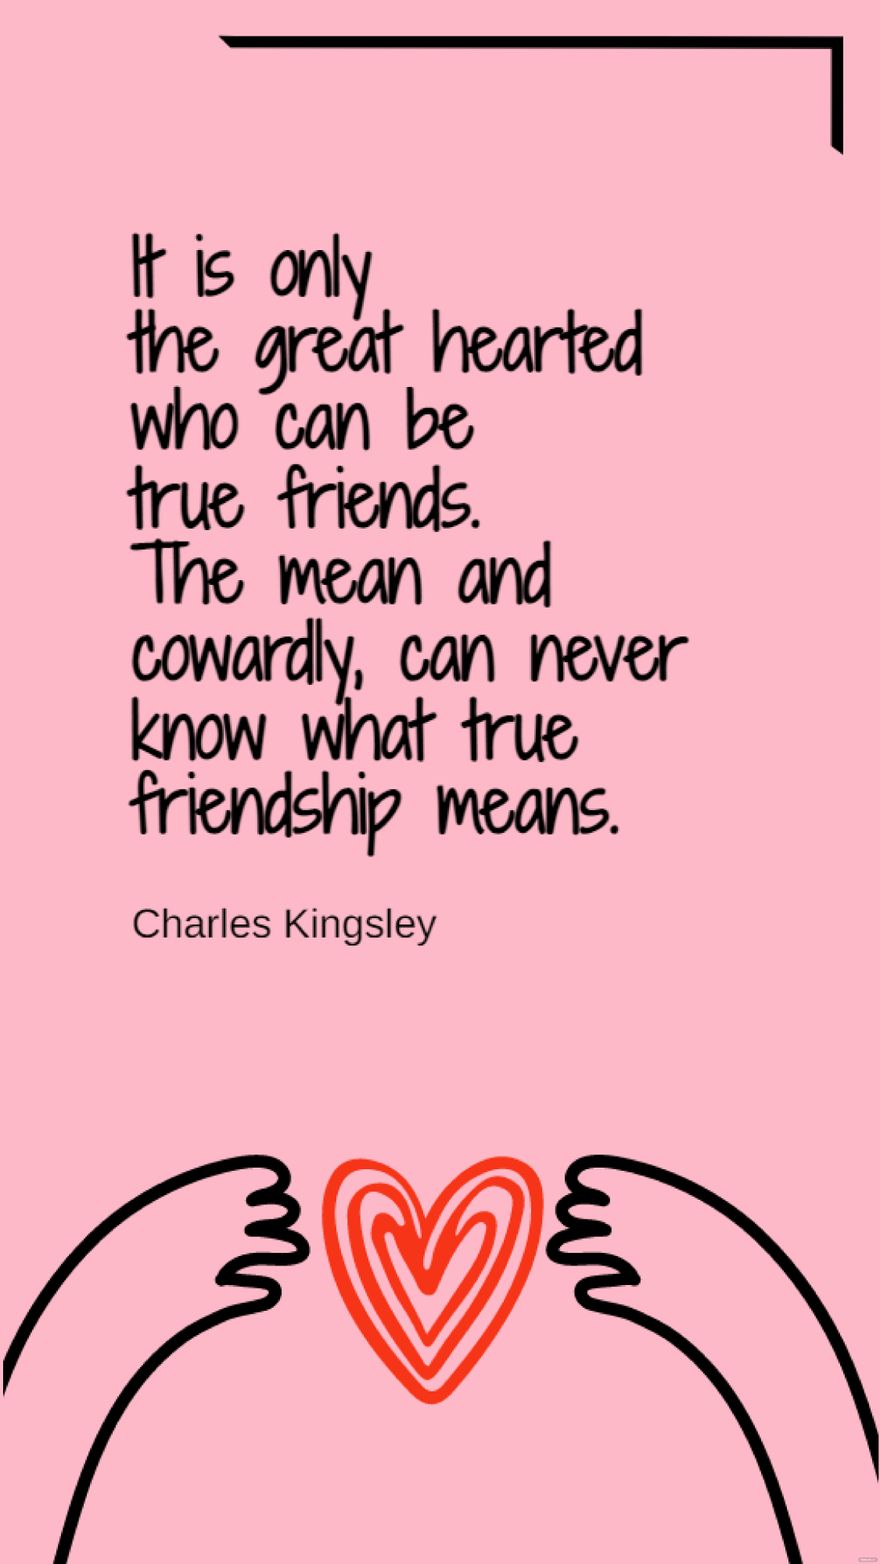 Free Charles Kingsley - It is only the great hearted who can be true friends. The mean and cowardly, can never know what true friendship means. in JPG